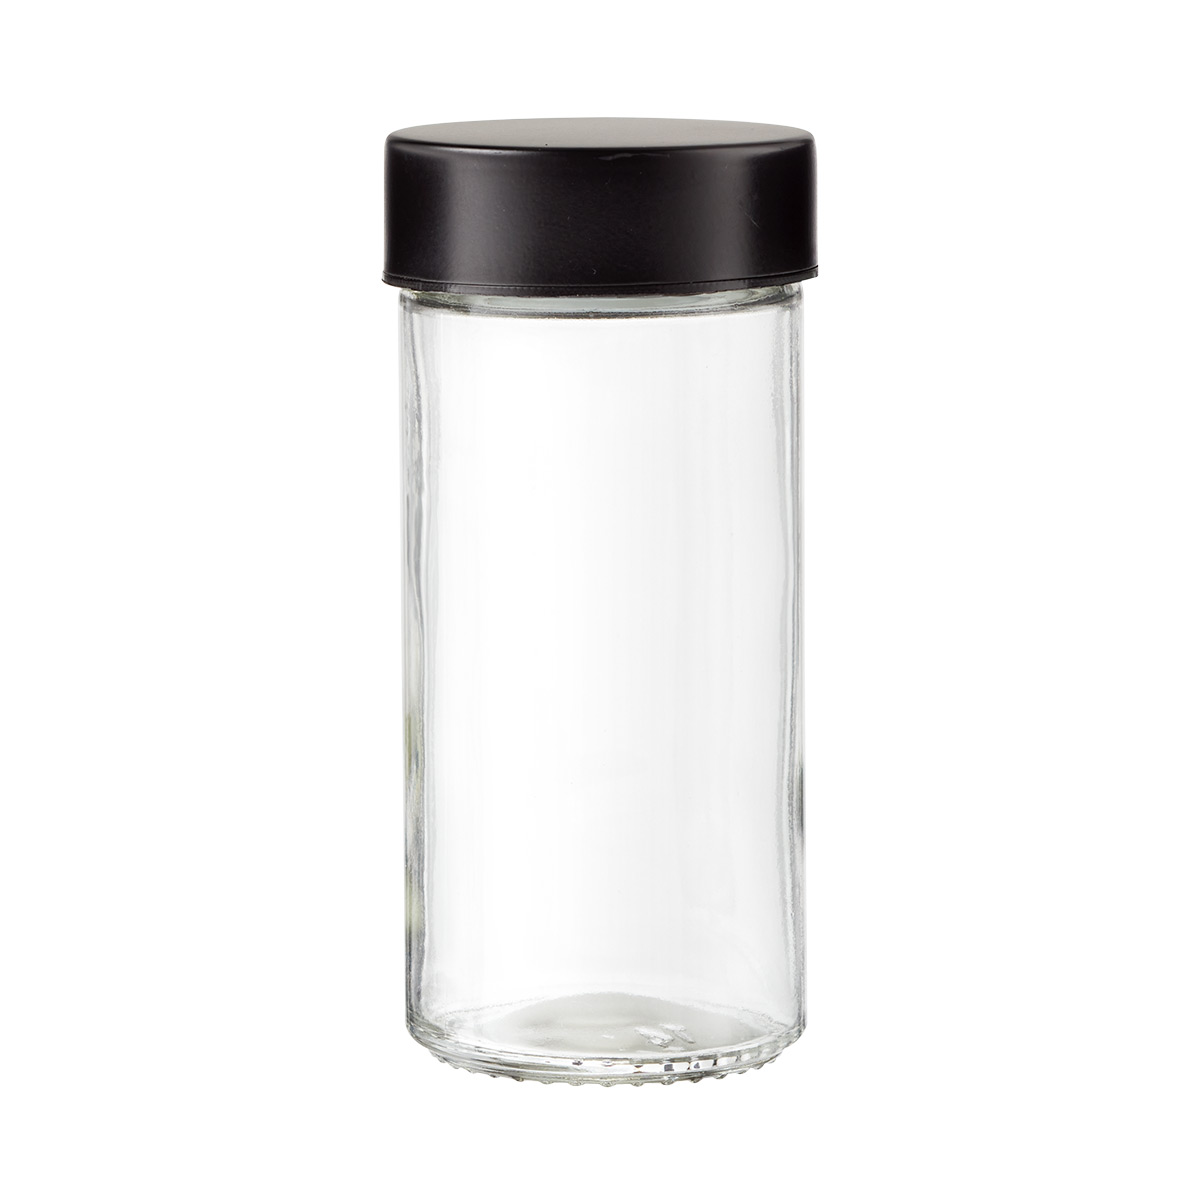 The Container Store 3 oz. Glass Spice Jar Matte Black